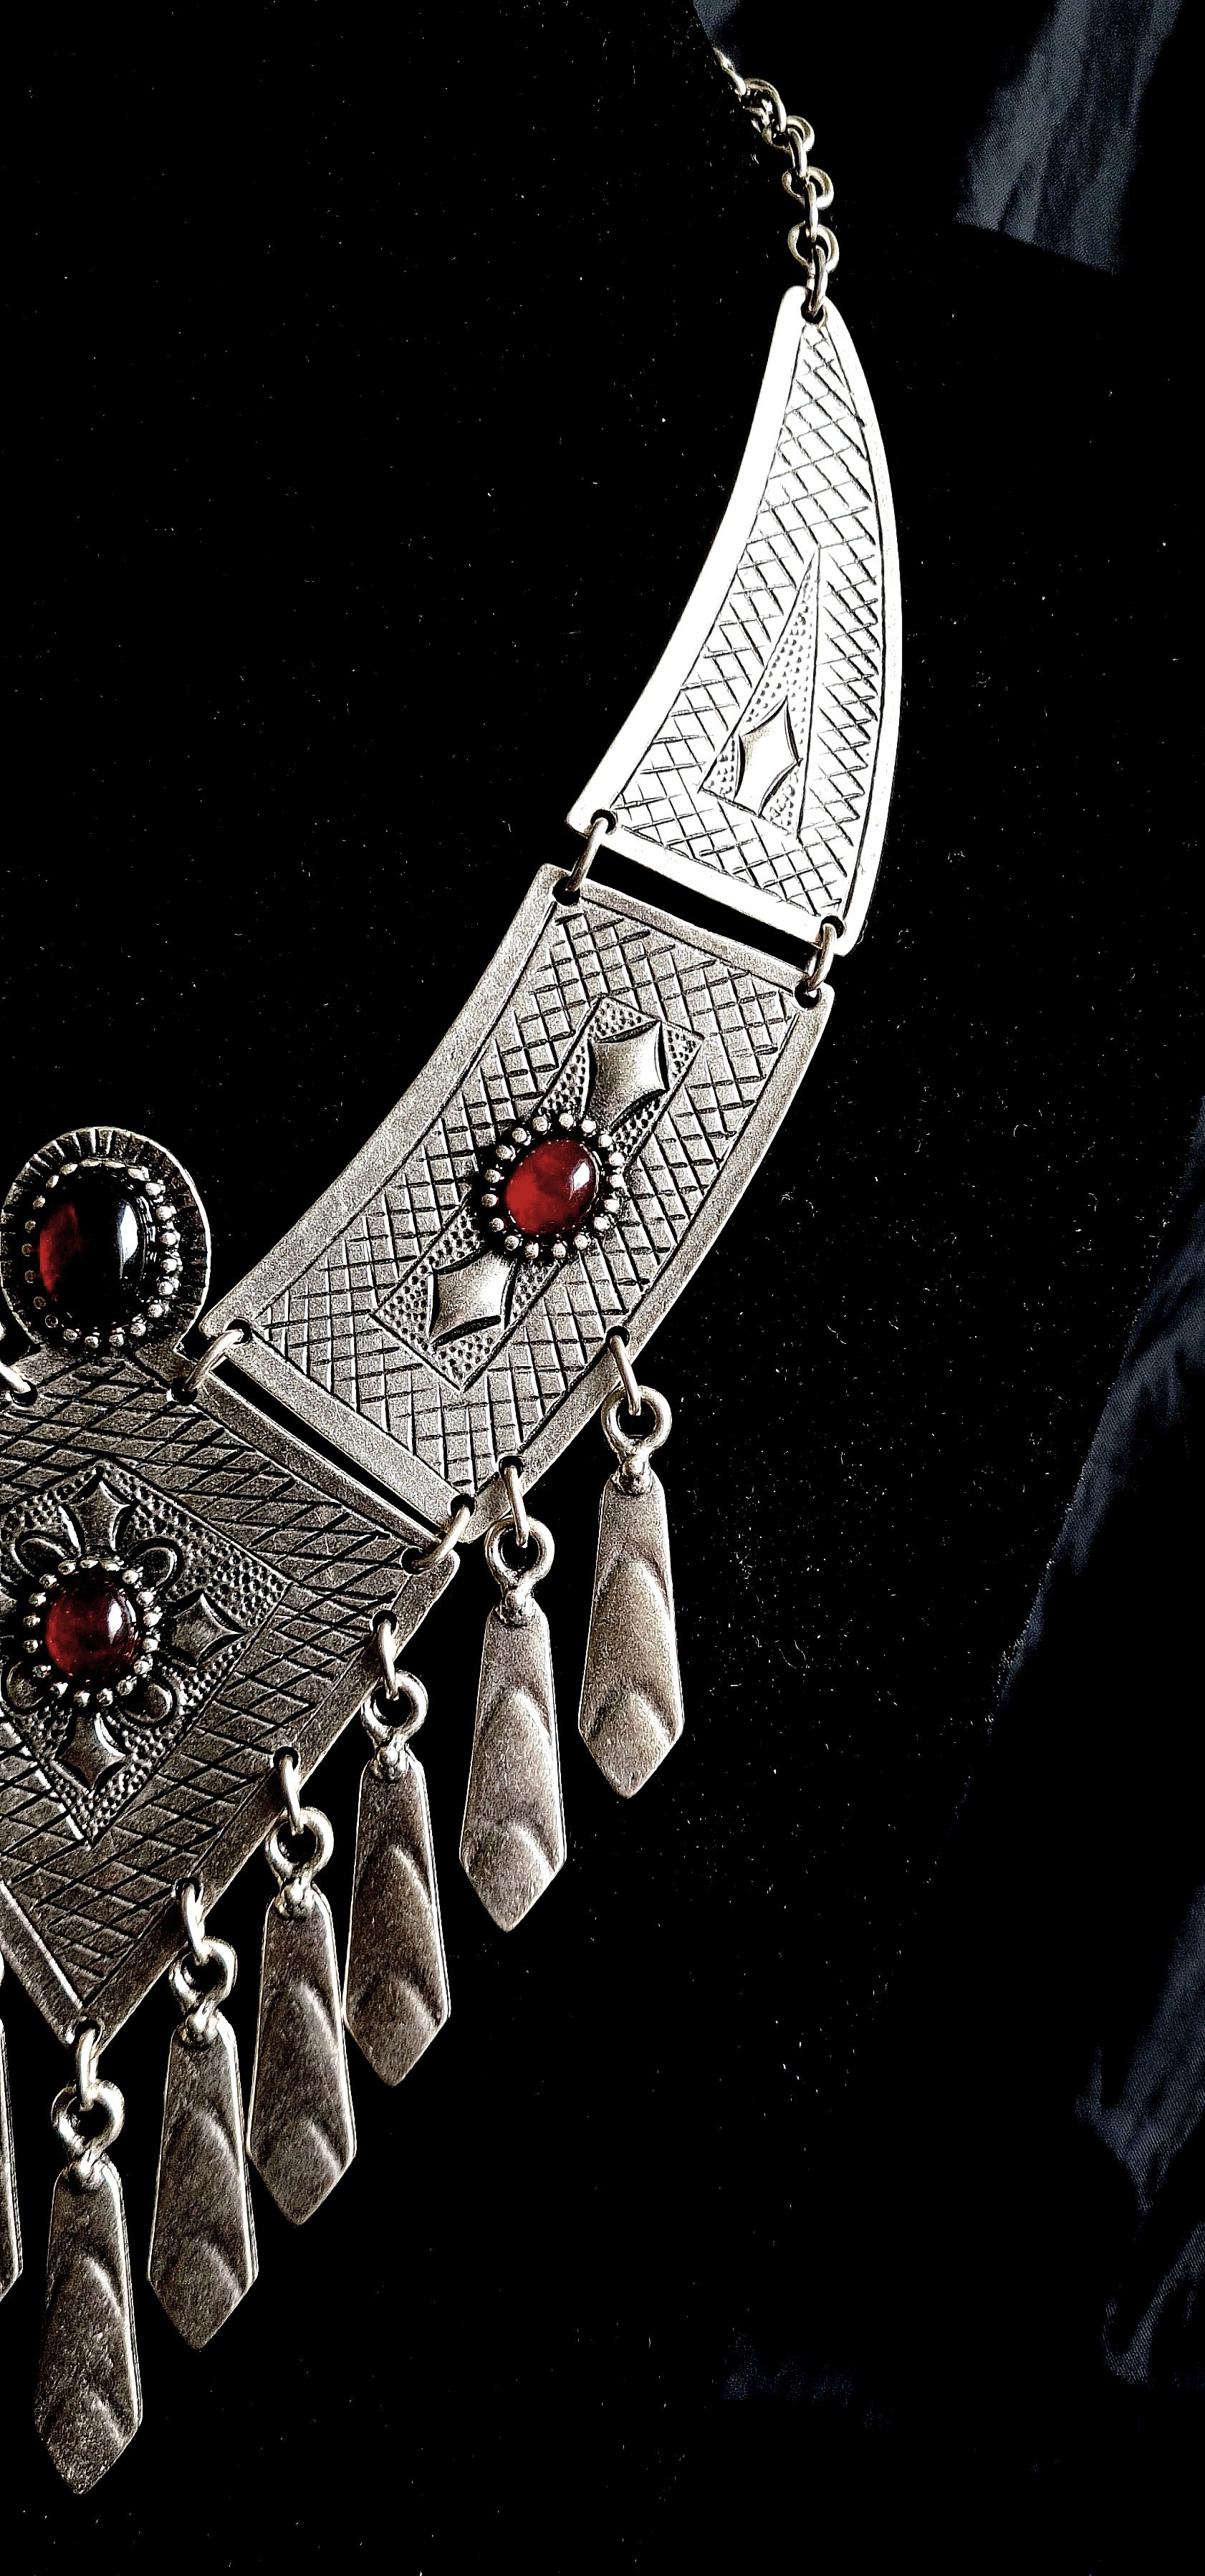 close up view of A silver necklace with red stones on a black background. The necklace is made of silver and has a delicate design. The red stones are round and have a deep red color. The necklace is long and hangs down to the chest.